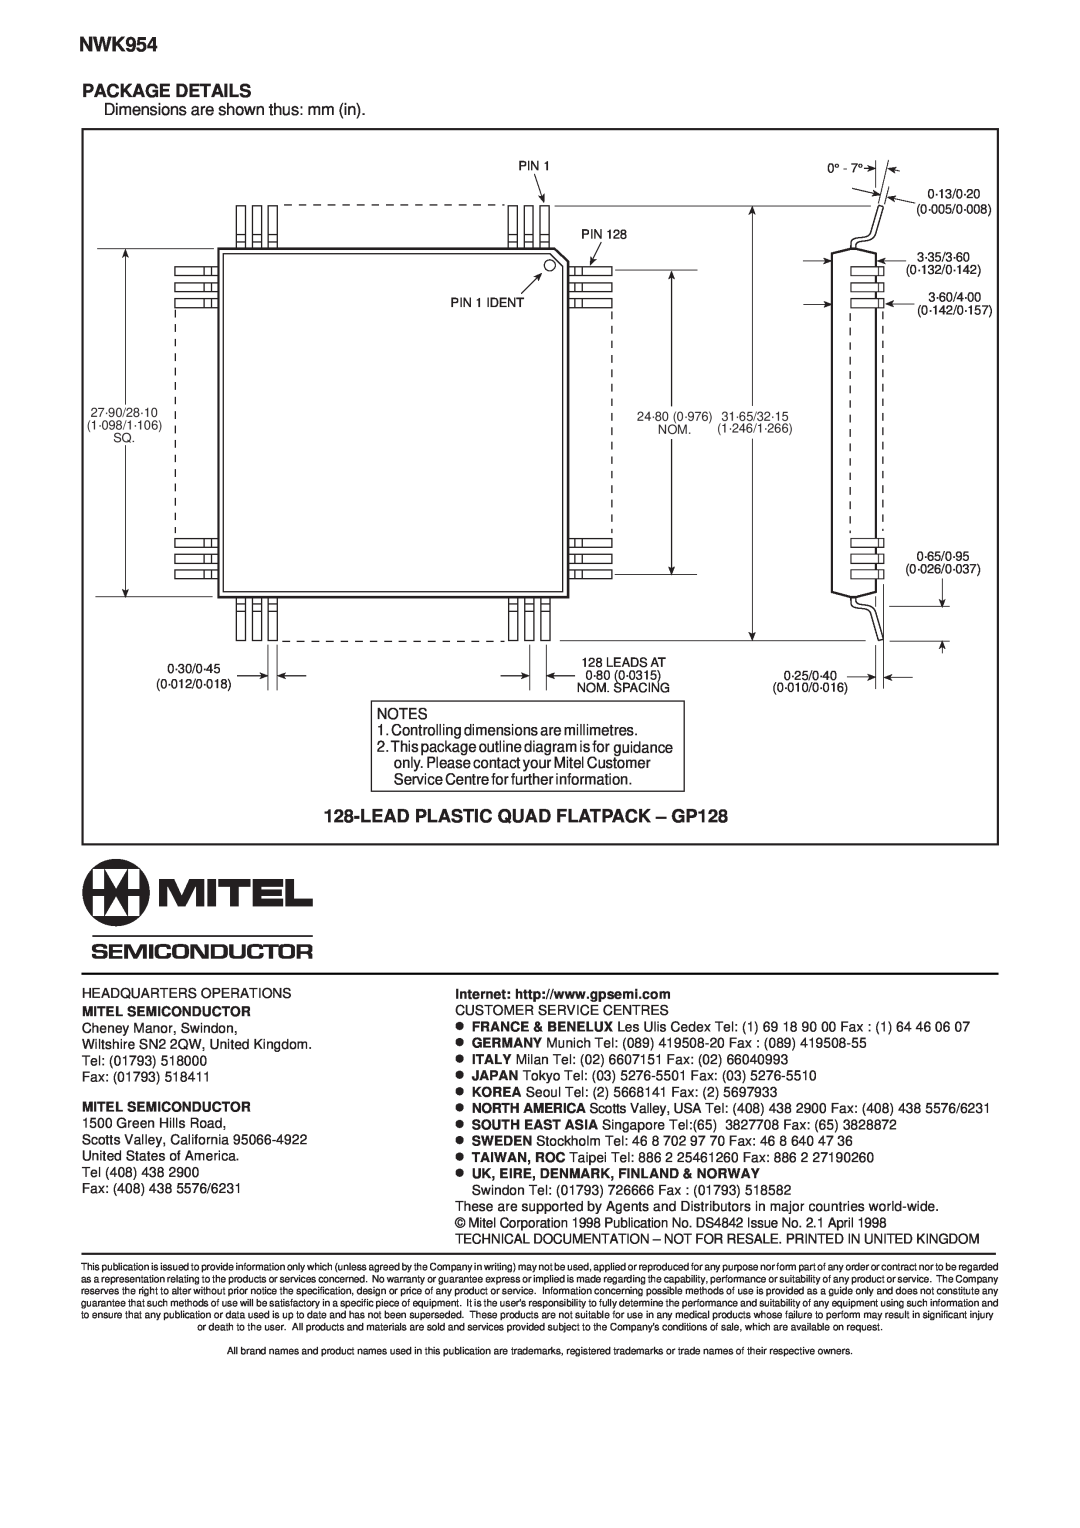 Mitel NWK954 LEAD PLASTIC QUAD FLATPACK - GP128, Package Details, Dimensions are shown thus mm in, Mitel Semiconductor 